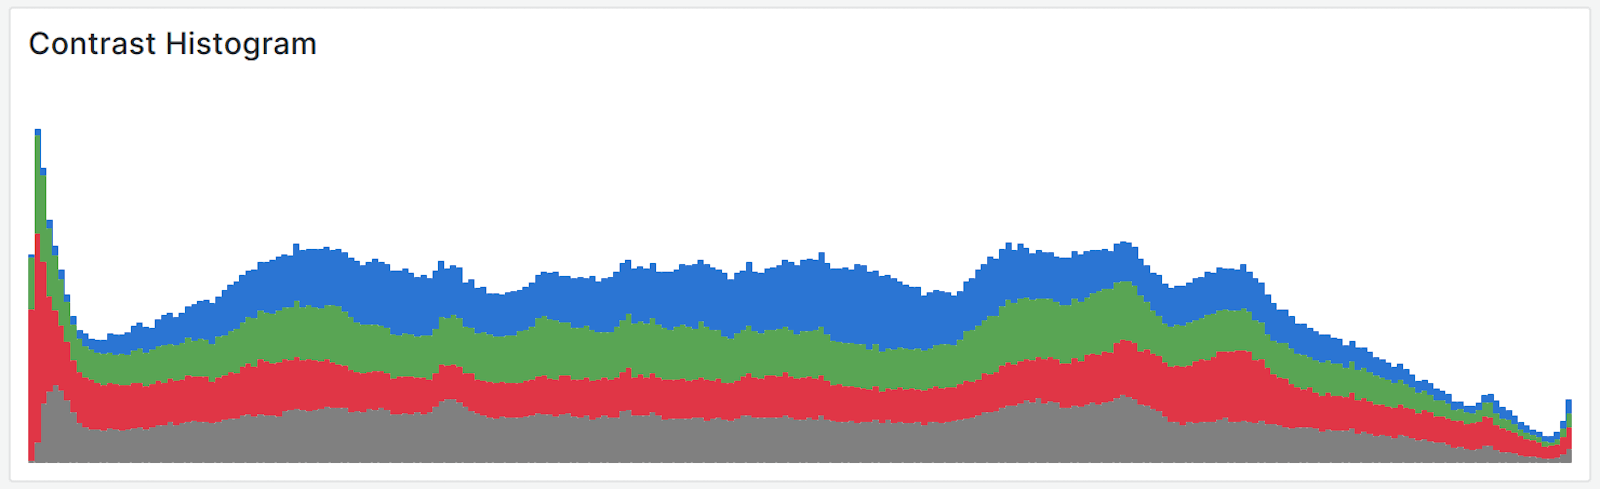 A close-up of a contrast histogram panel visualizing metrics in a four-color graph.